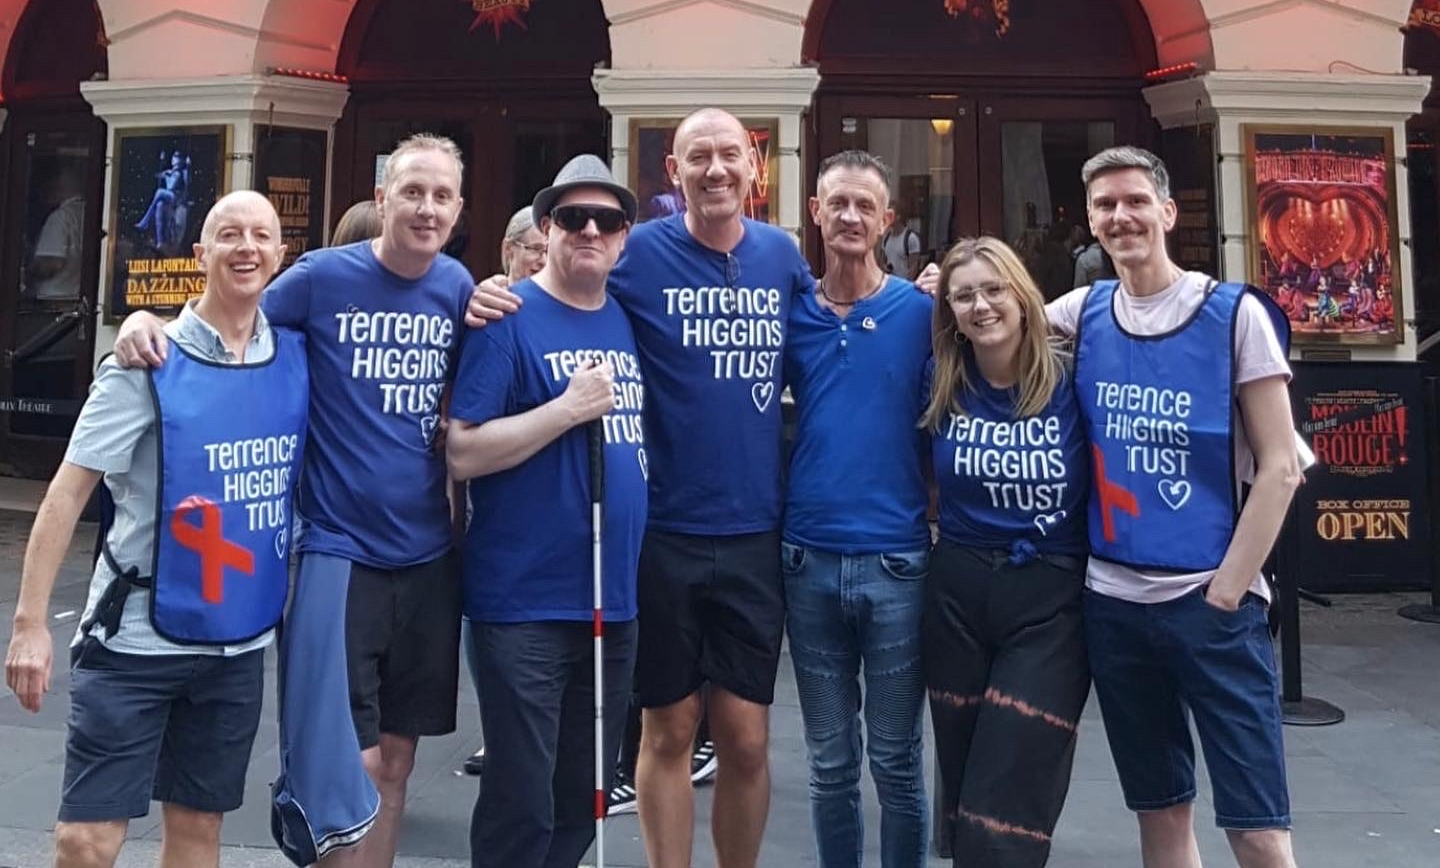 A group of Terrence Higgins Trust fundraisers outside a West End theatre.